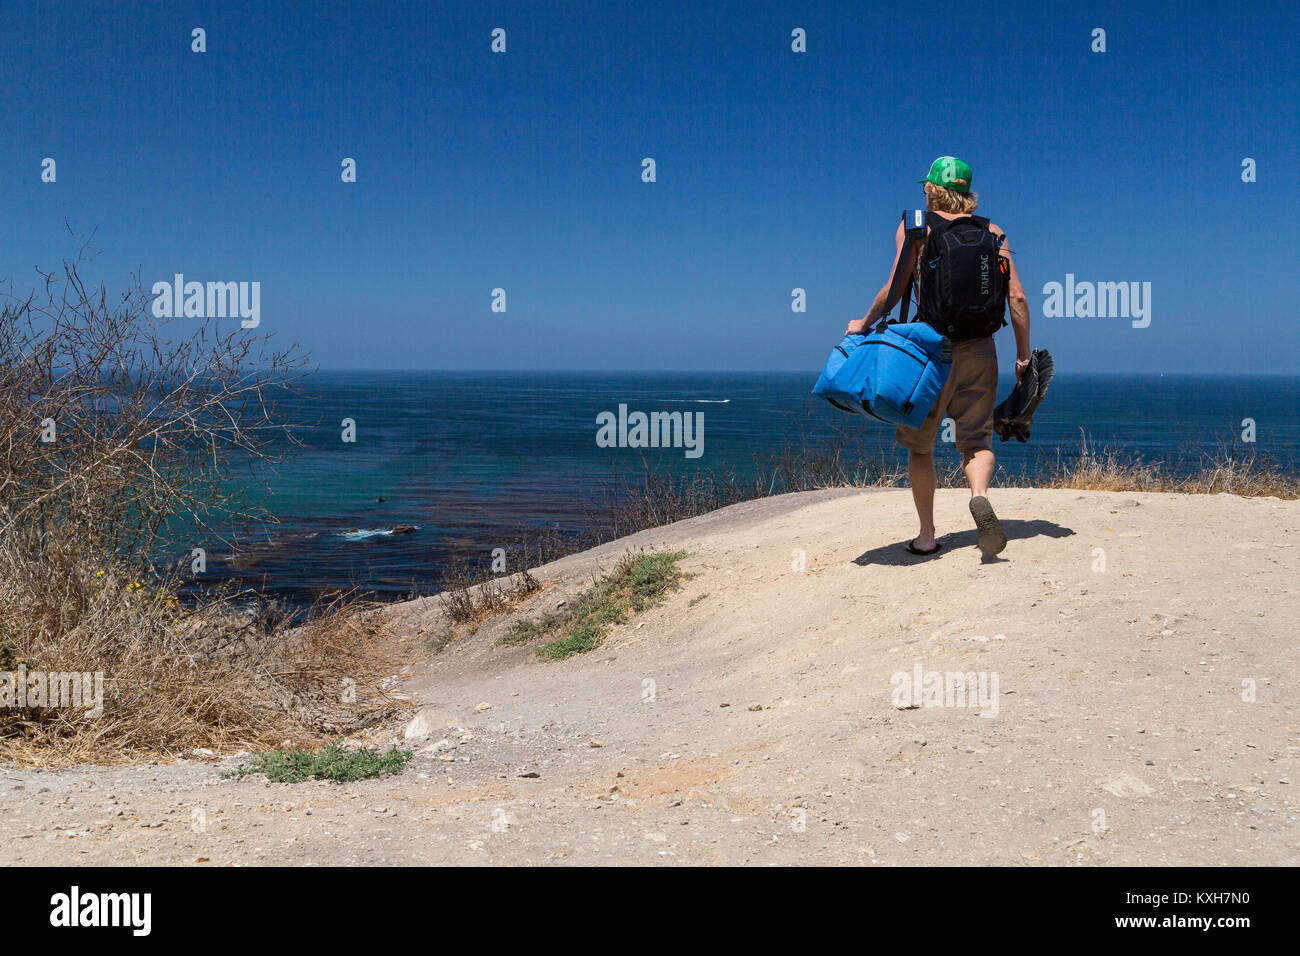 A diver carries gear down a dirt trail to the ocean in Southern California. Stock Photo